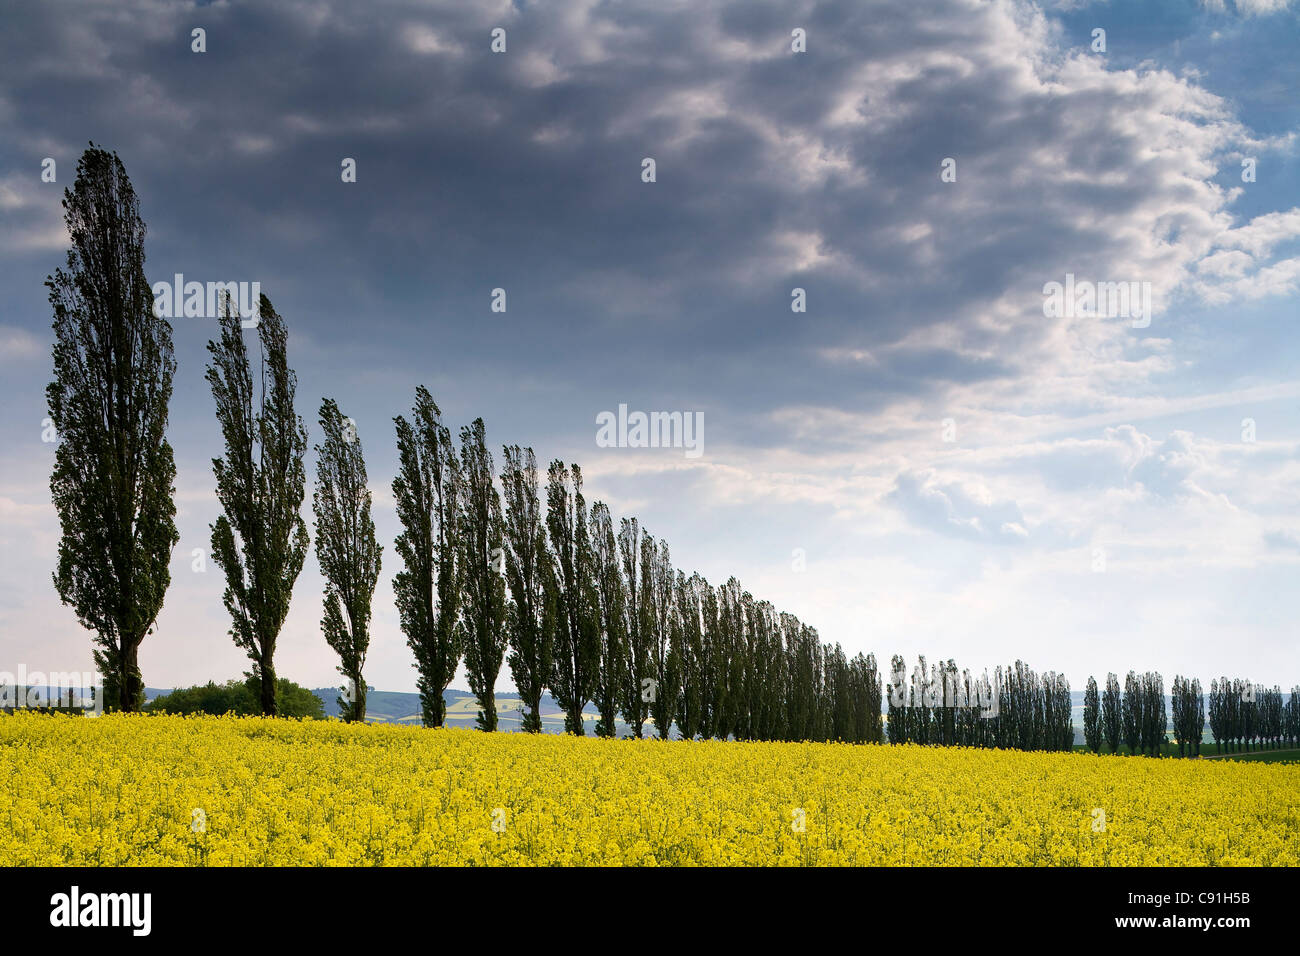 Canola field and alley under clouded sky, Eichsfeld, Lower Saxony, Germany, Europe Stock Photo